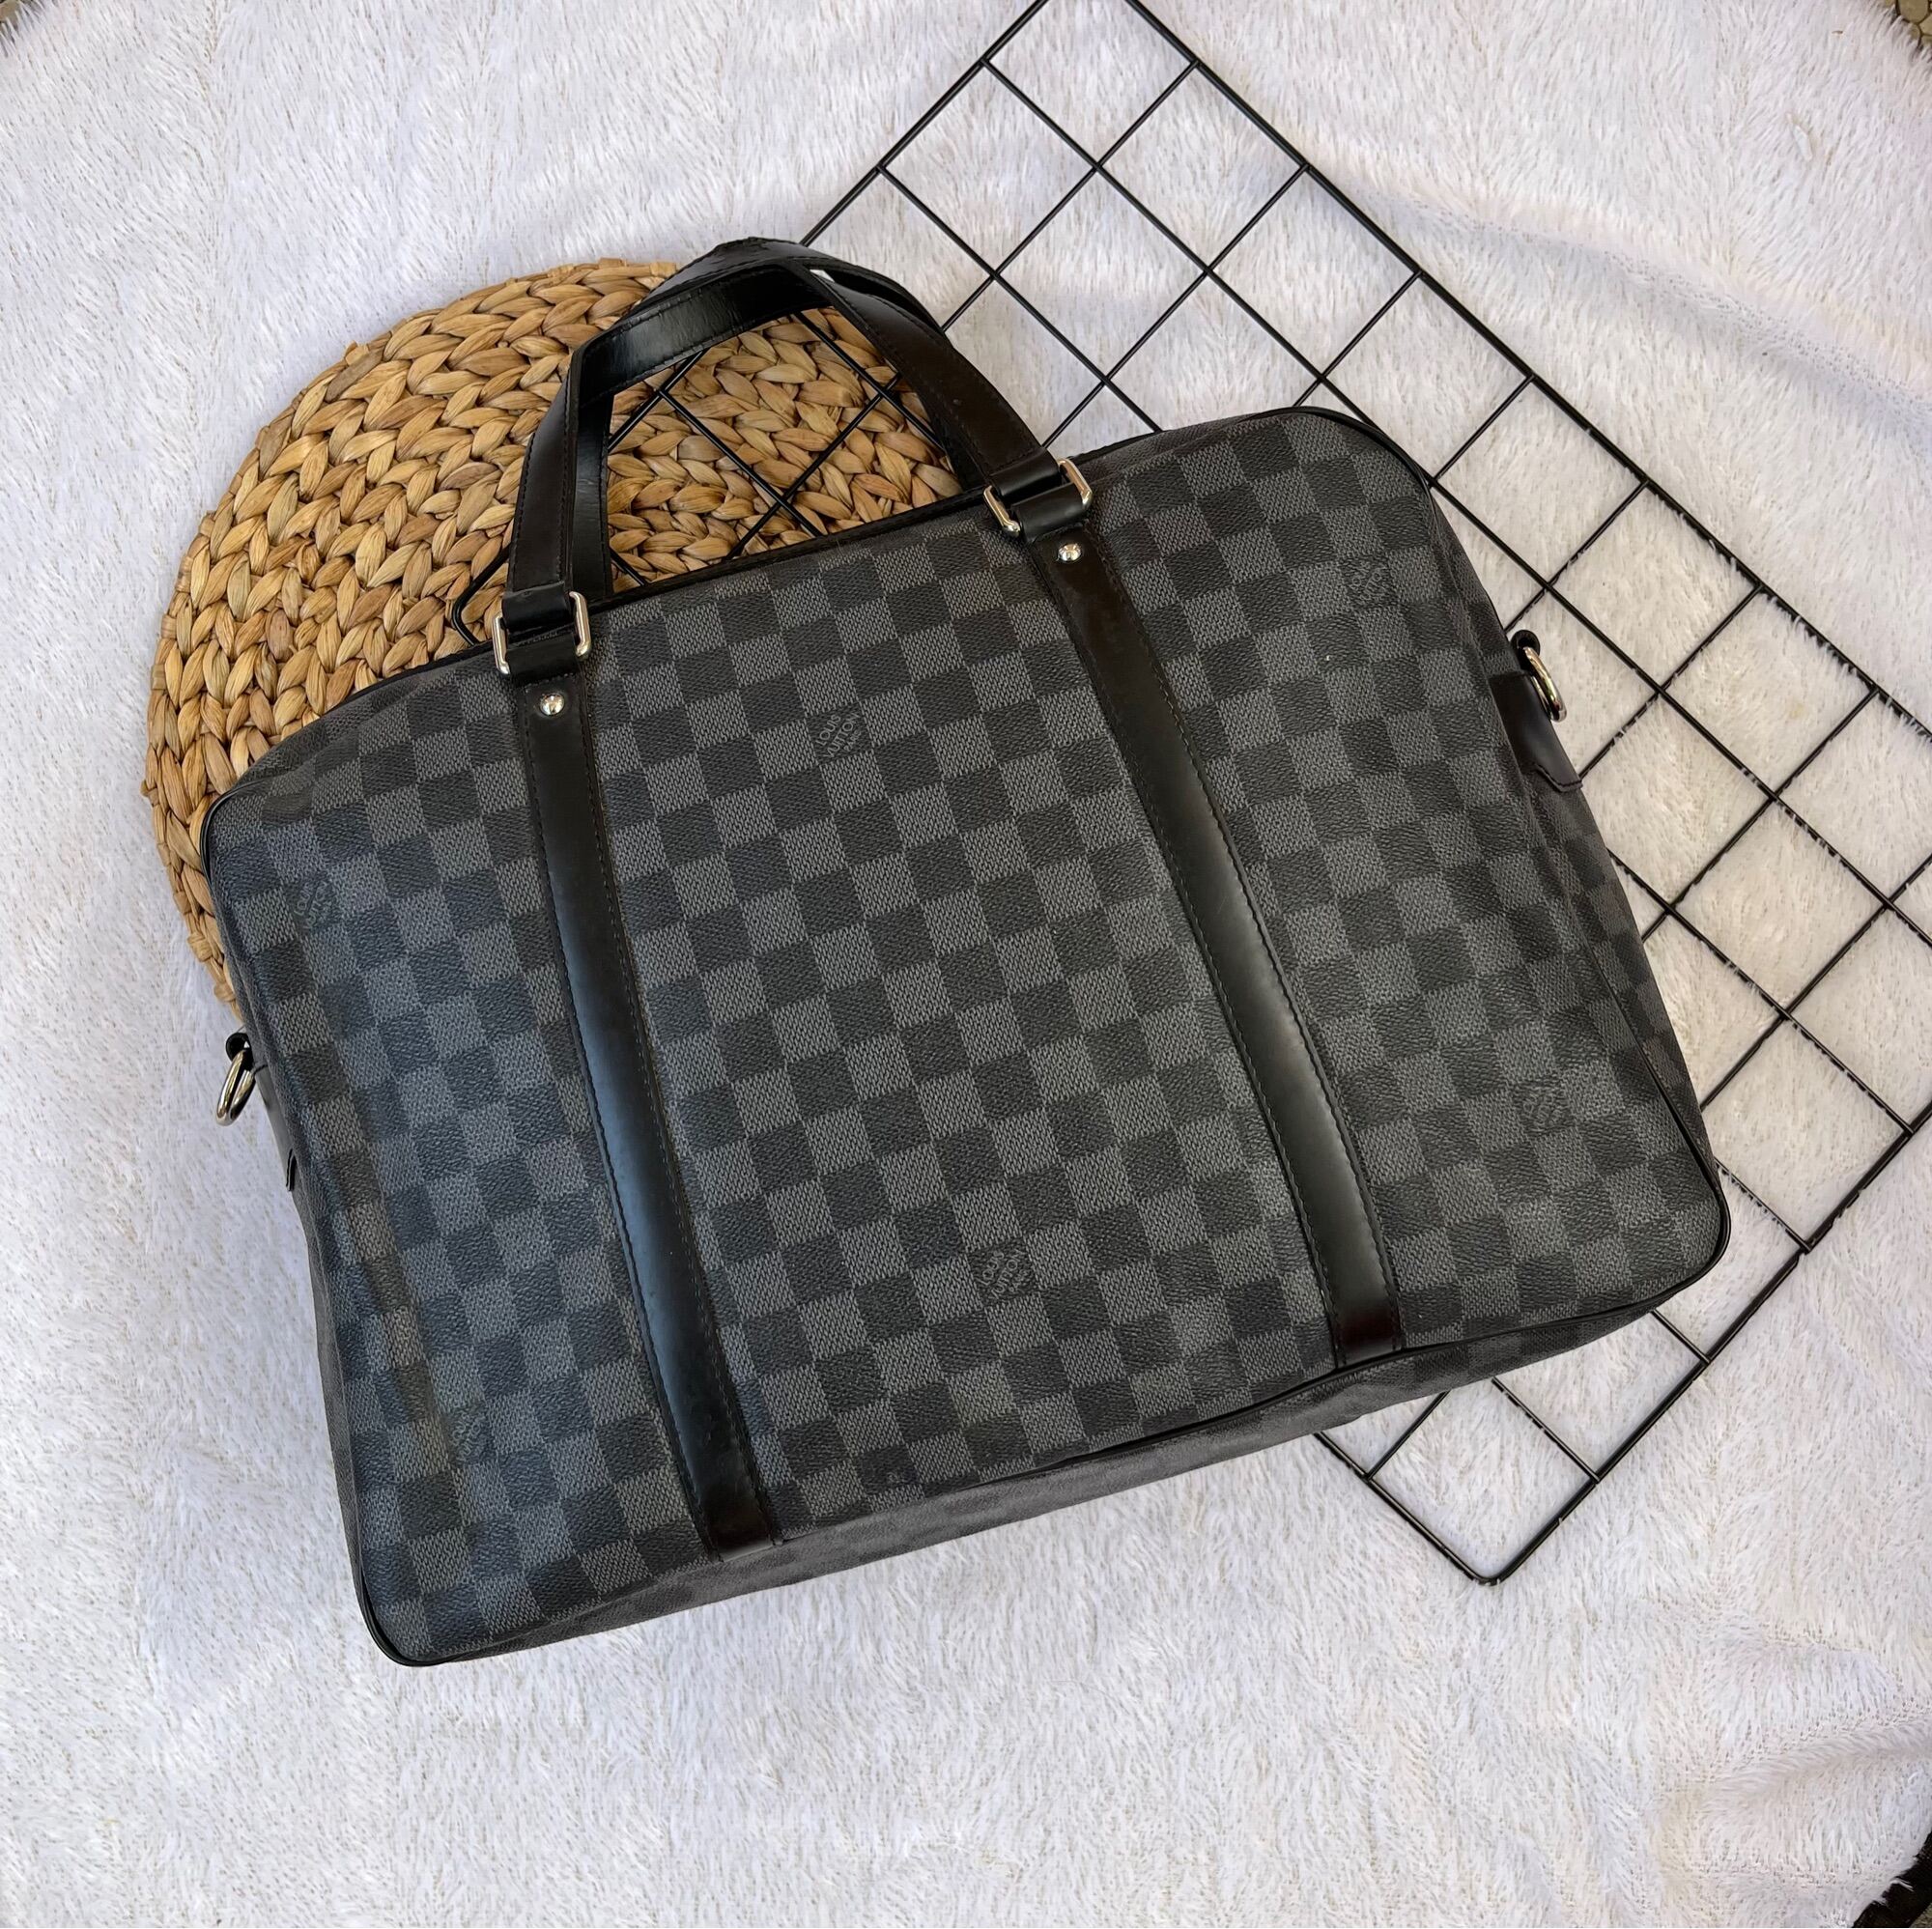 Louis Vuitton Neverfull Bags for sale in Bogor, Indonesia